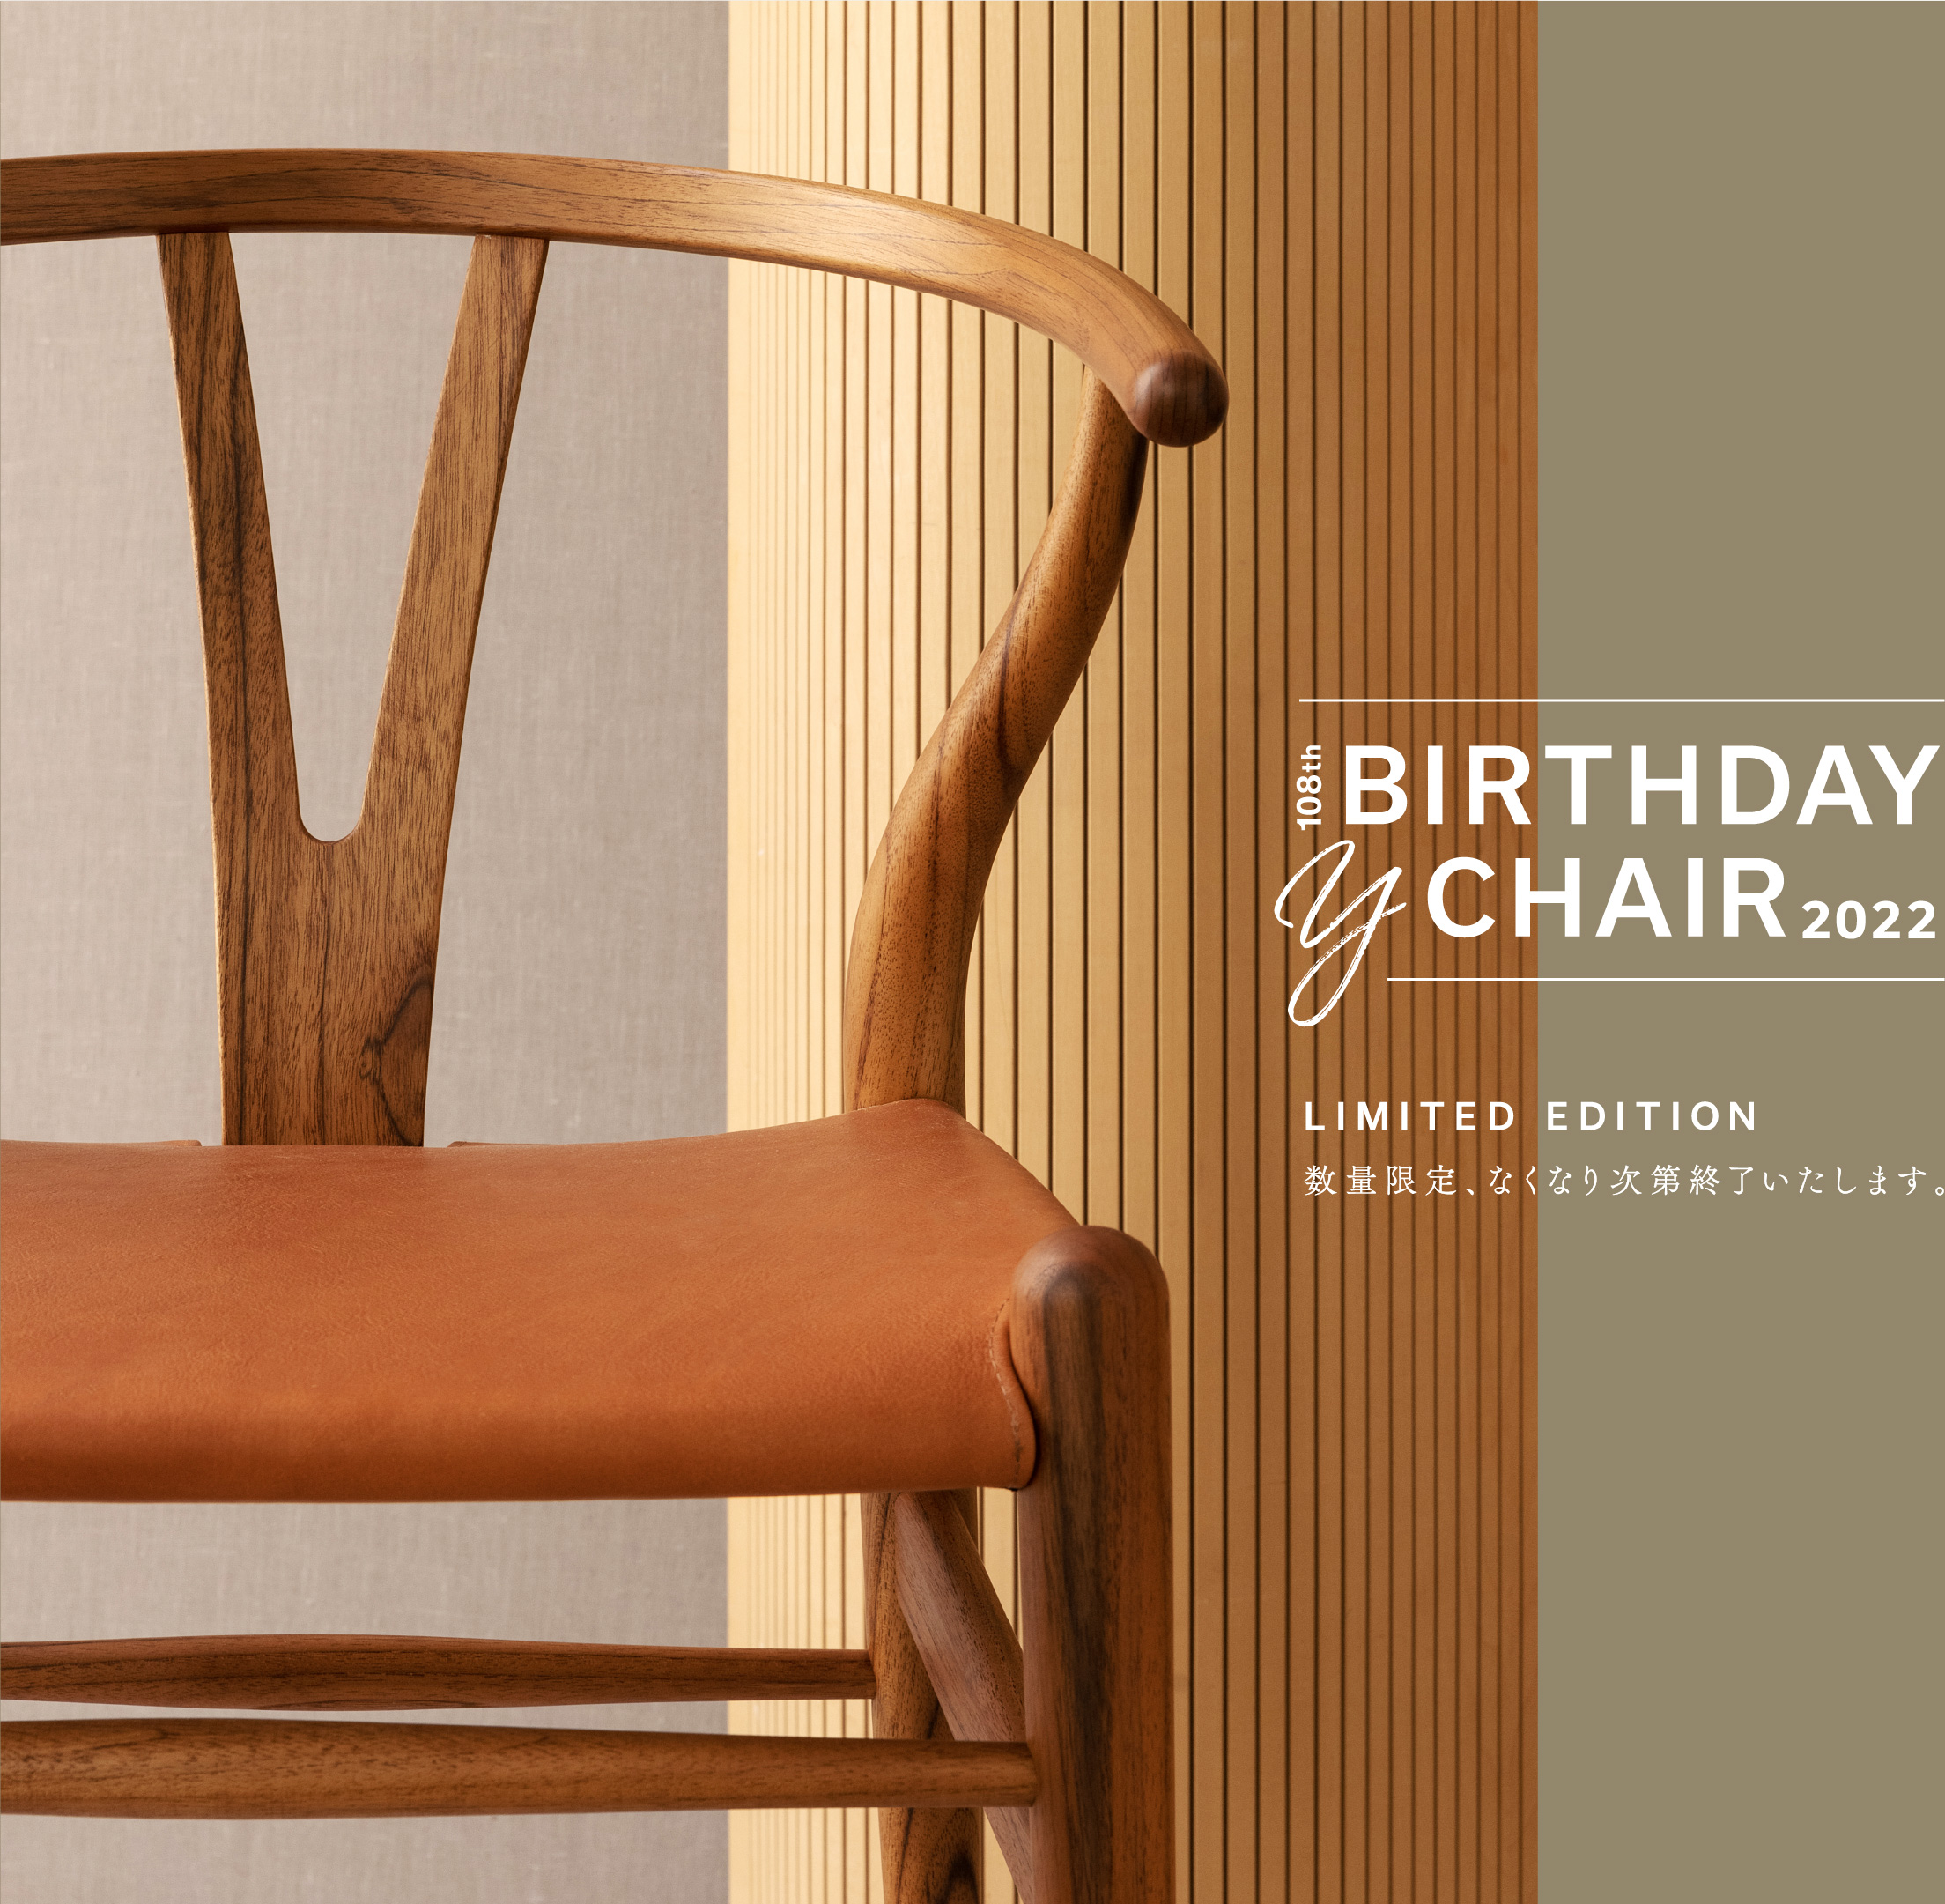 BIRTHDAY Y CHAIR 2022　数量限定、なくなり次第終了いたします。